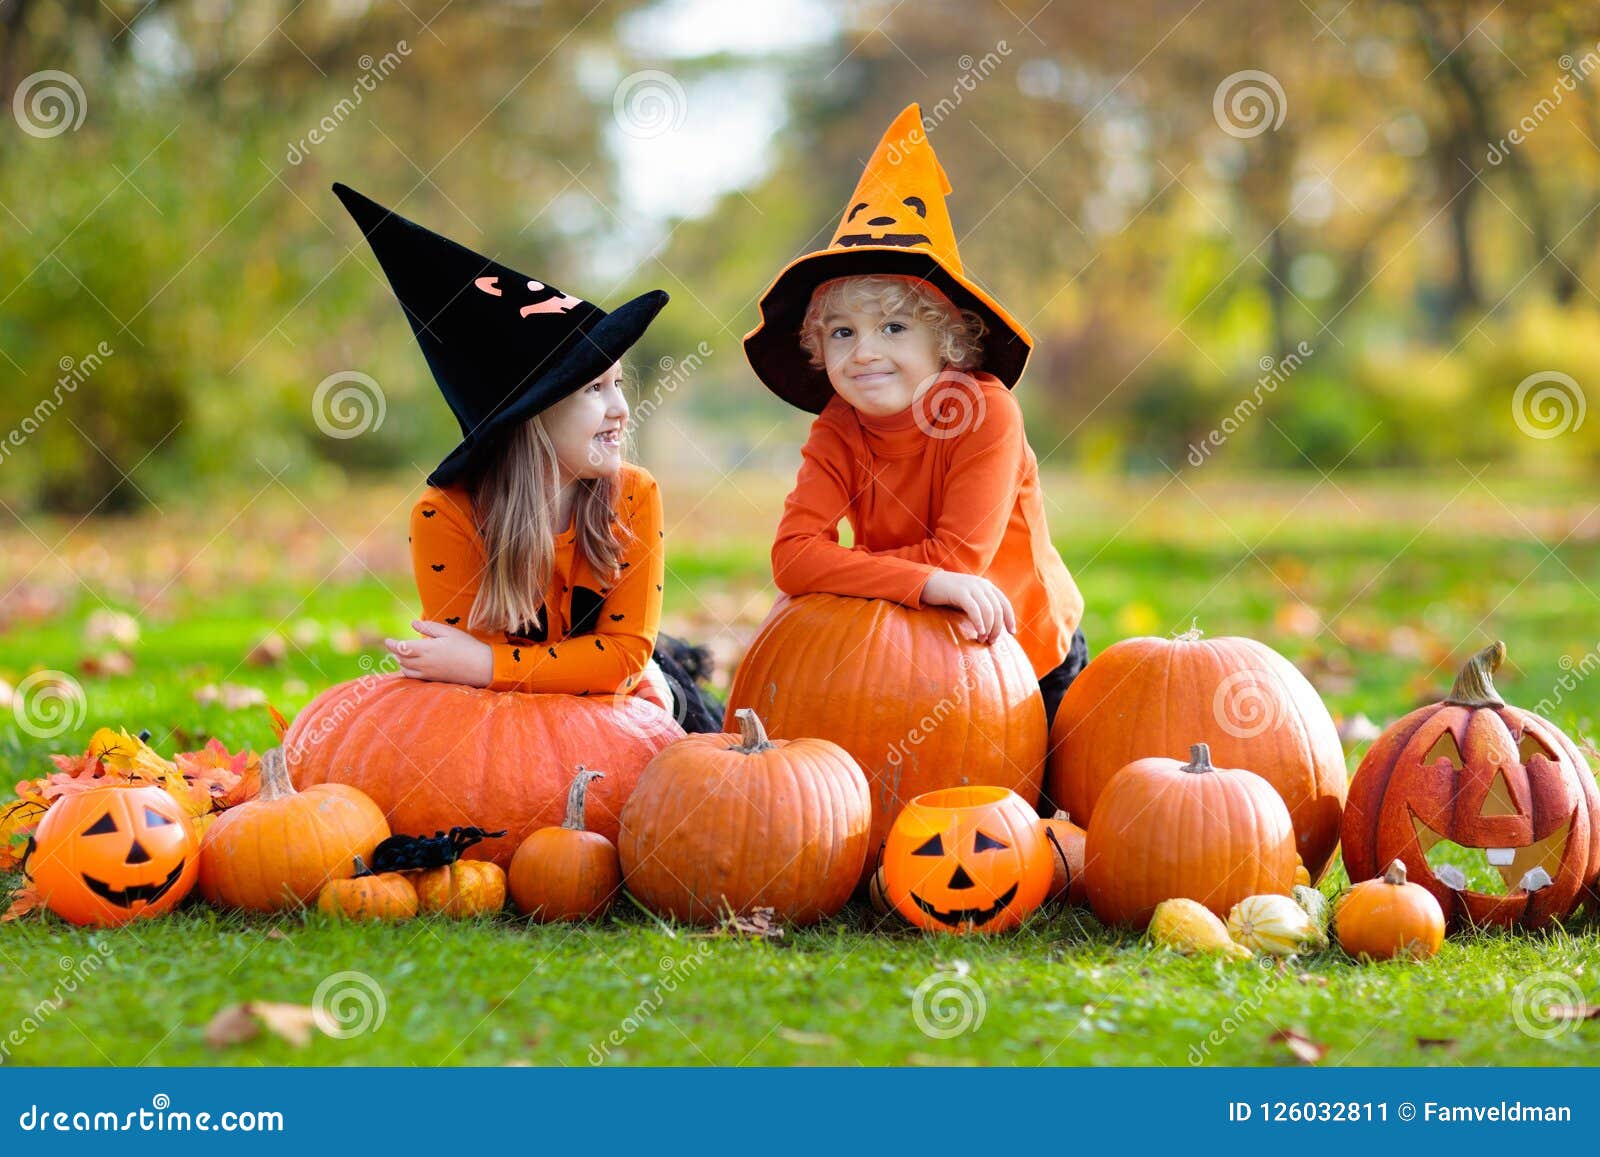 Kids with Pumpkins in Halloween Costumes Stock Image - Image of little ...